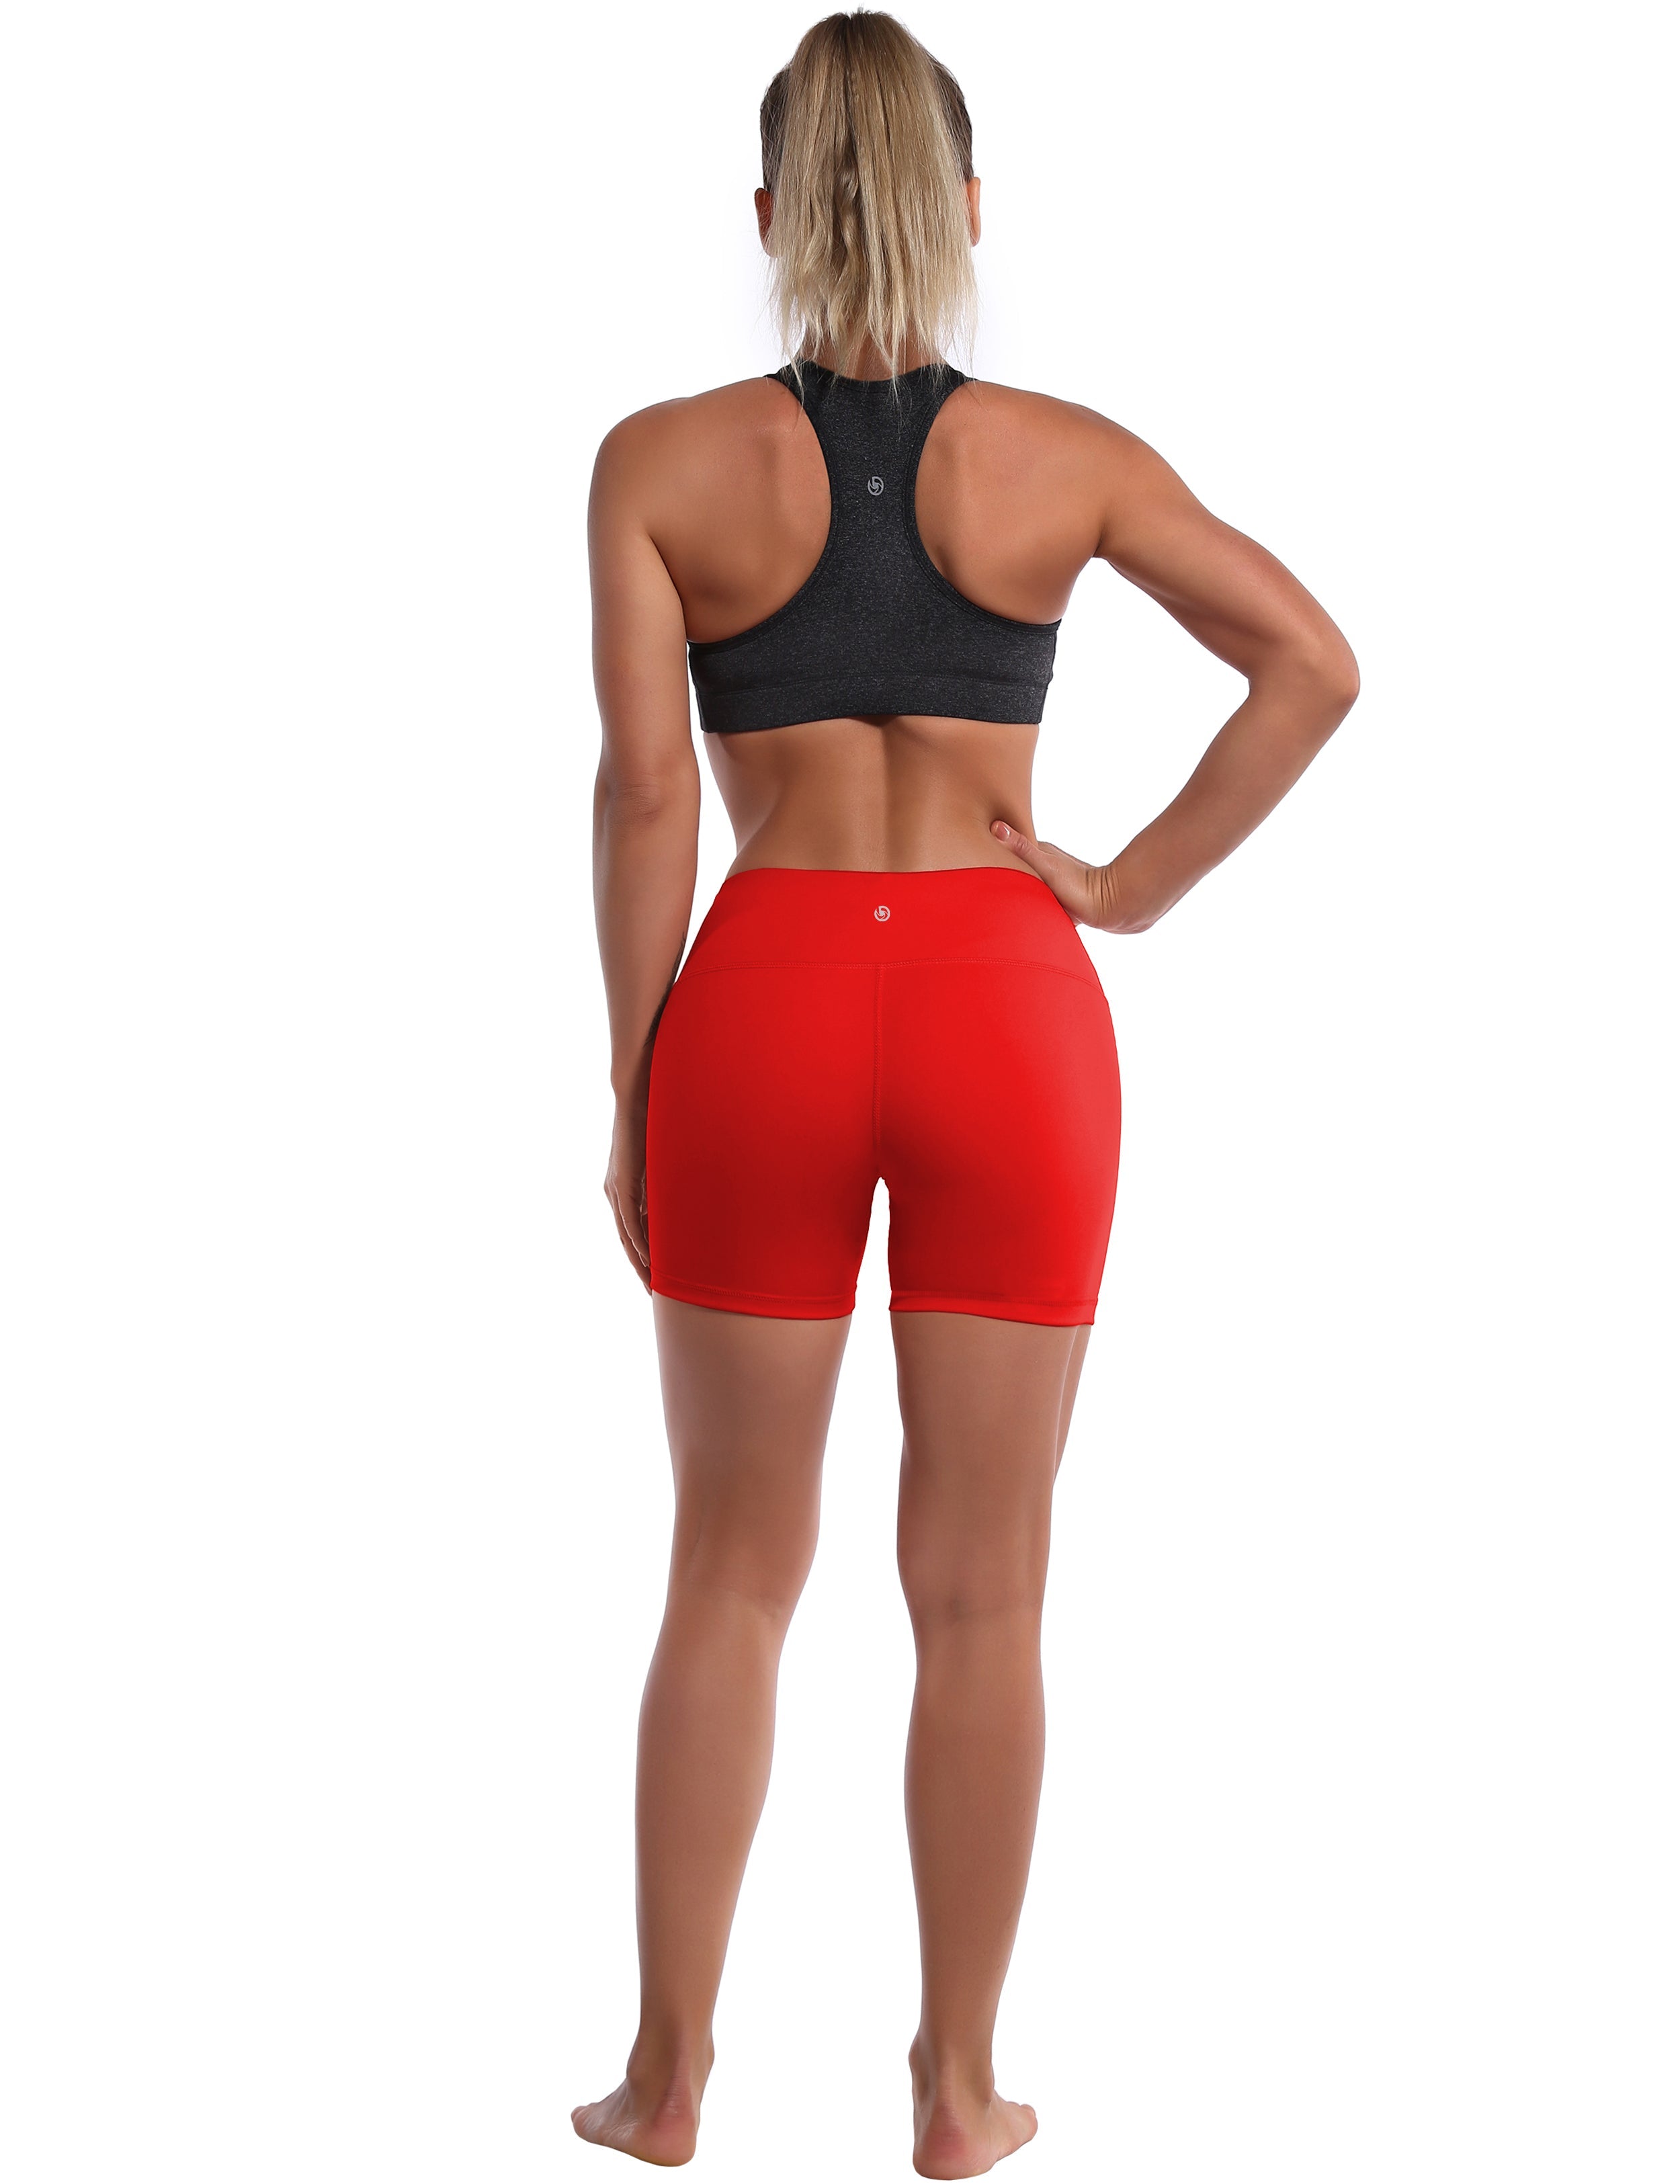 4" Tall Size Shorts scarlet Sleek, soft, smooth and totally comfortable: our newest style is here. Softest-ever fabric High elasticity High density 4-way stretch Fabric doesn't attract lint easily No see-through Moisture-wicking Machine wash 75% Nylon, 25% Spandex